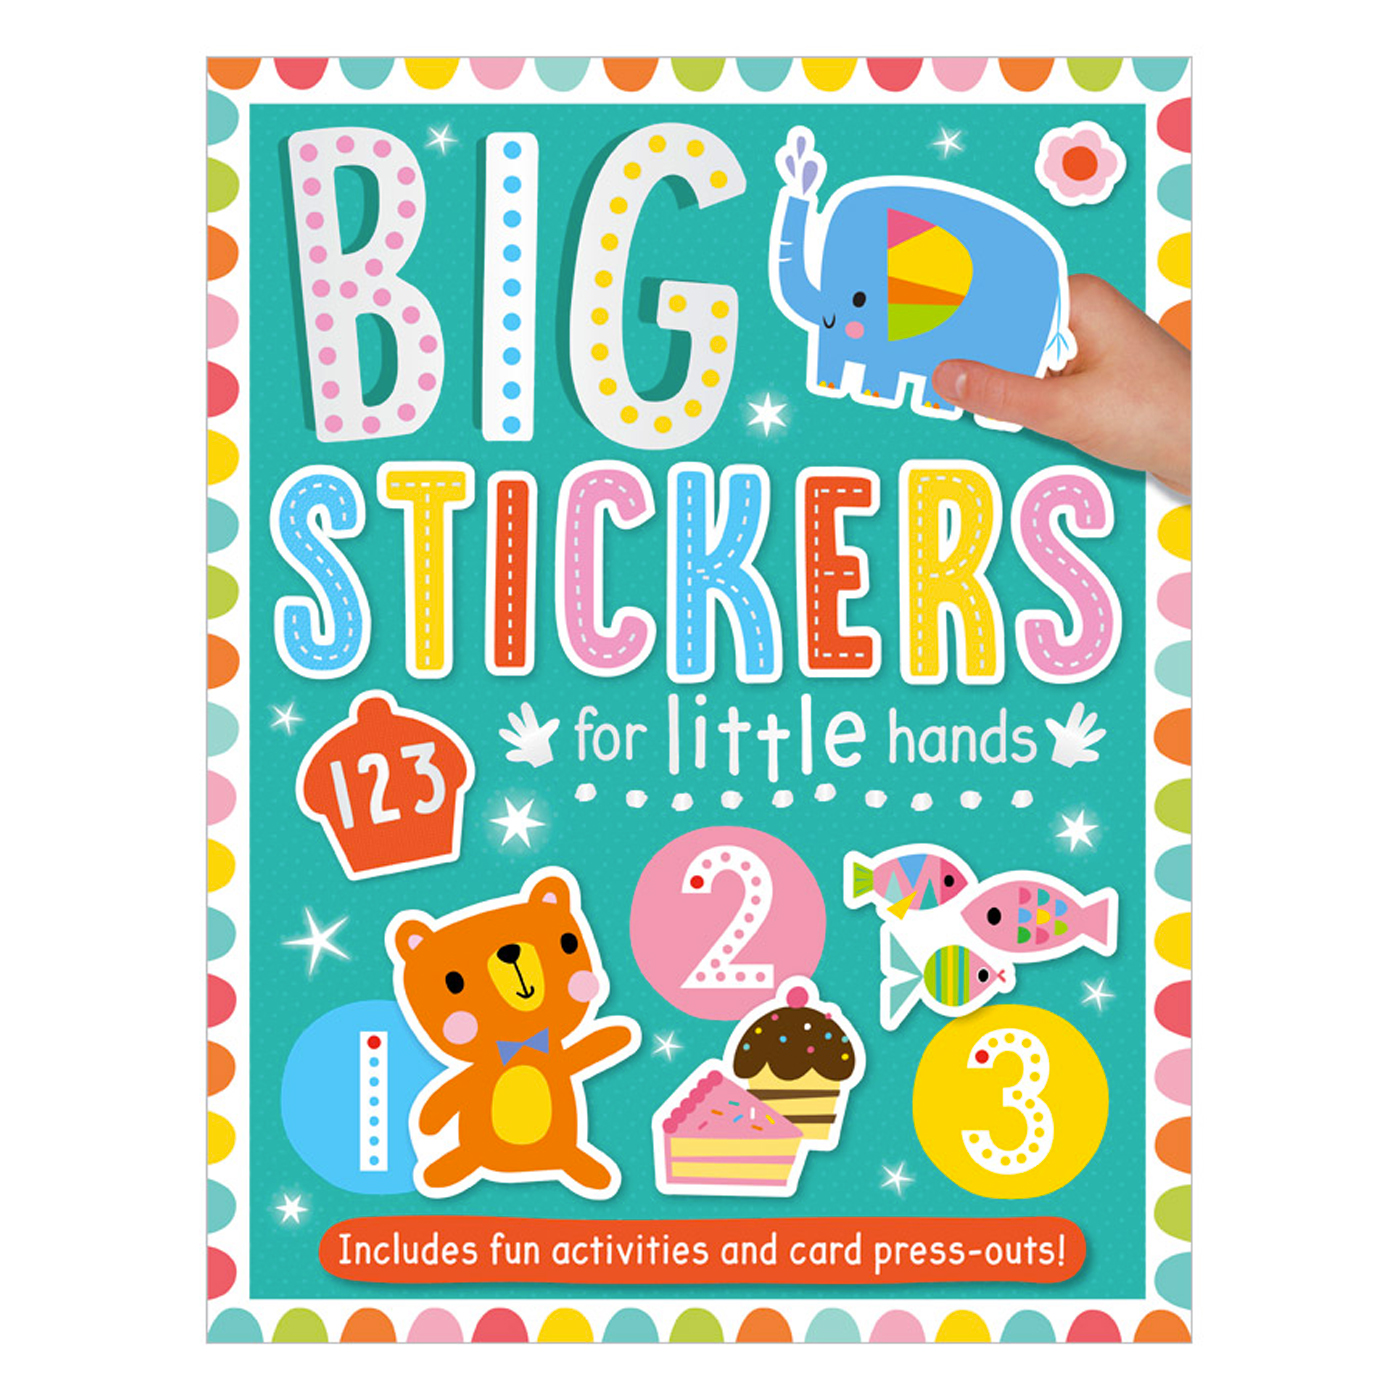  Big Stickers for Little Hands 123